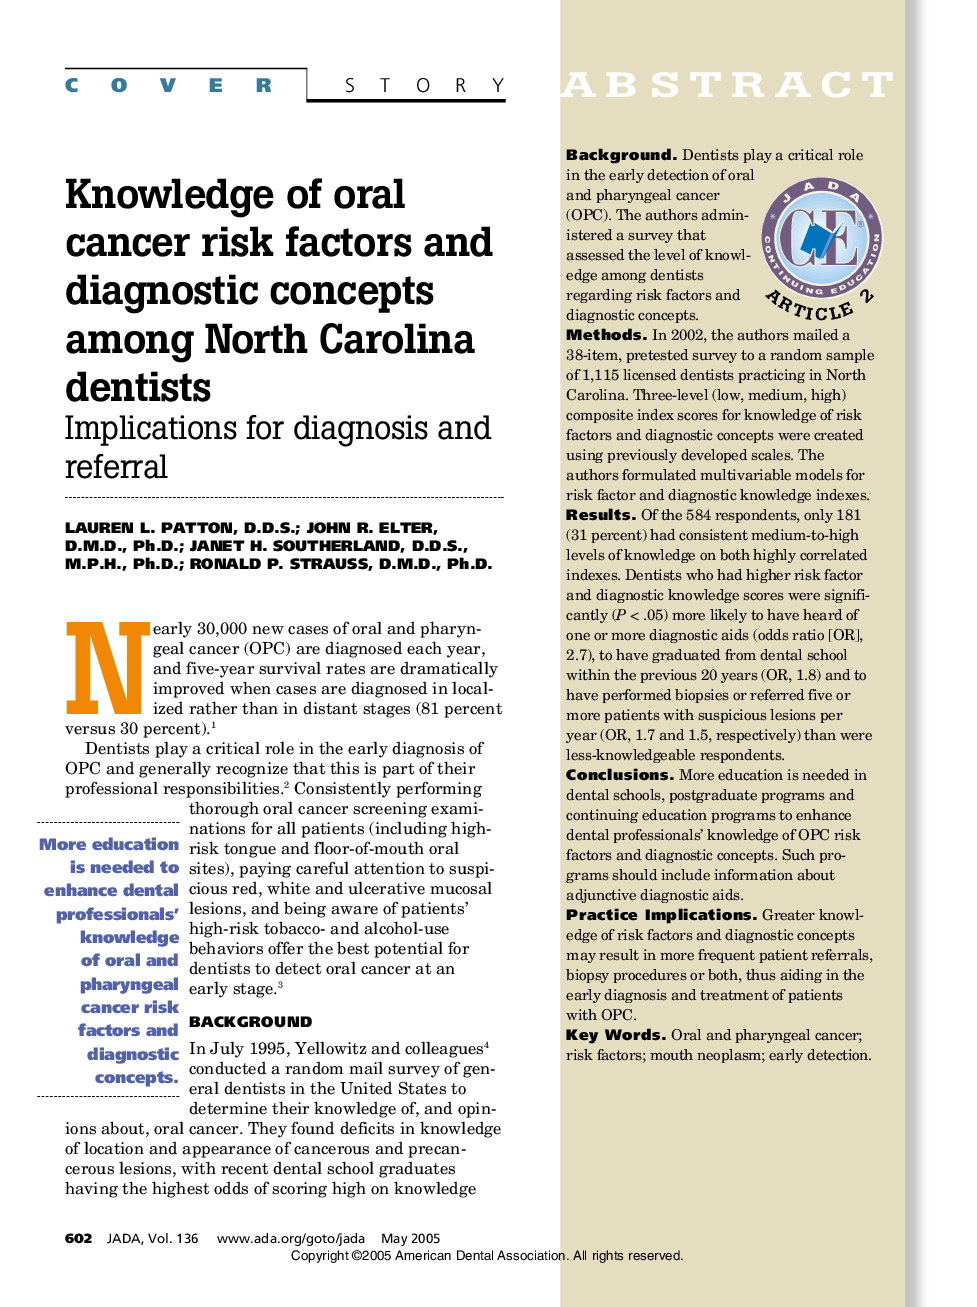 Knowledge of oral cancer risk factors and diagnostic concepts among North Carolina dentists